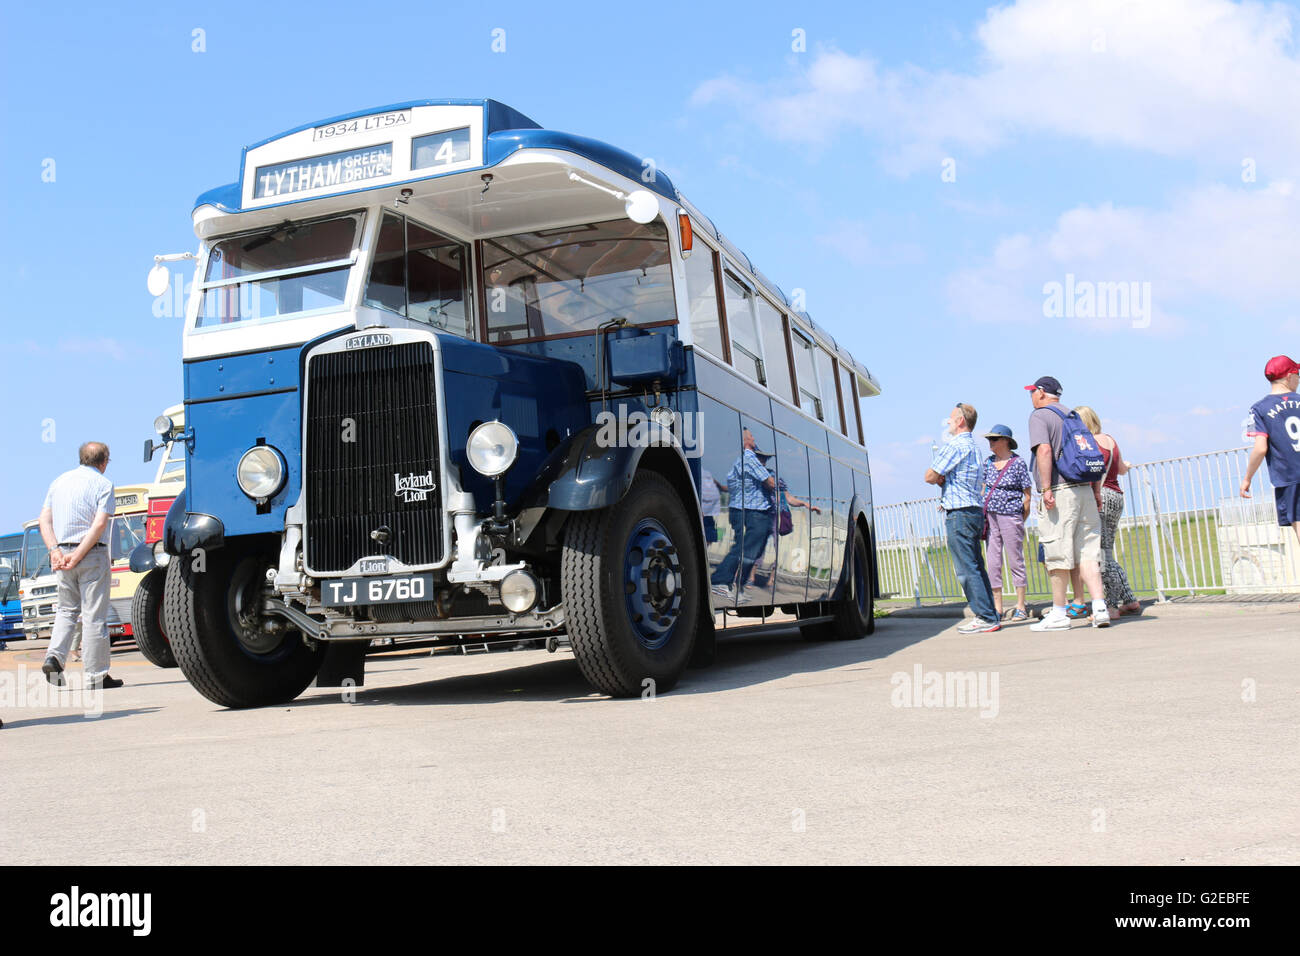 Morecambe Promenade Morecambe United Kingdom, 29th May 2016  There was a turn out of historic buses on Bank Holiday Sunday on Morecambe Promenade ranging from a 1931 Ribble Leyland Lion bus through to a present day wi if equipped Stagecoach double decker Gold bus.  As part of the event there where bus trips along Morecambe's promenade in the vintage buses from outside the resorts famous Winter Gardens Theatre Credit:  David Billinge/Alamy Live News Stock Photo